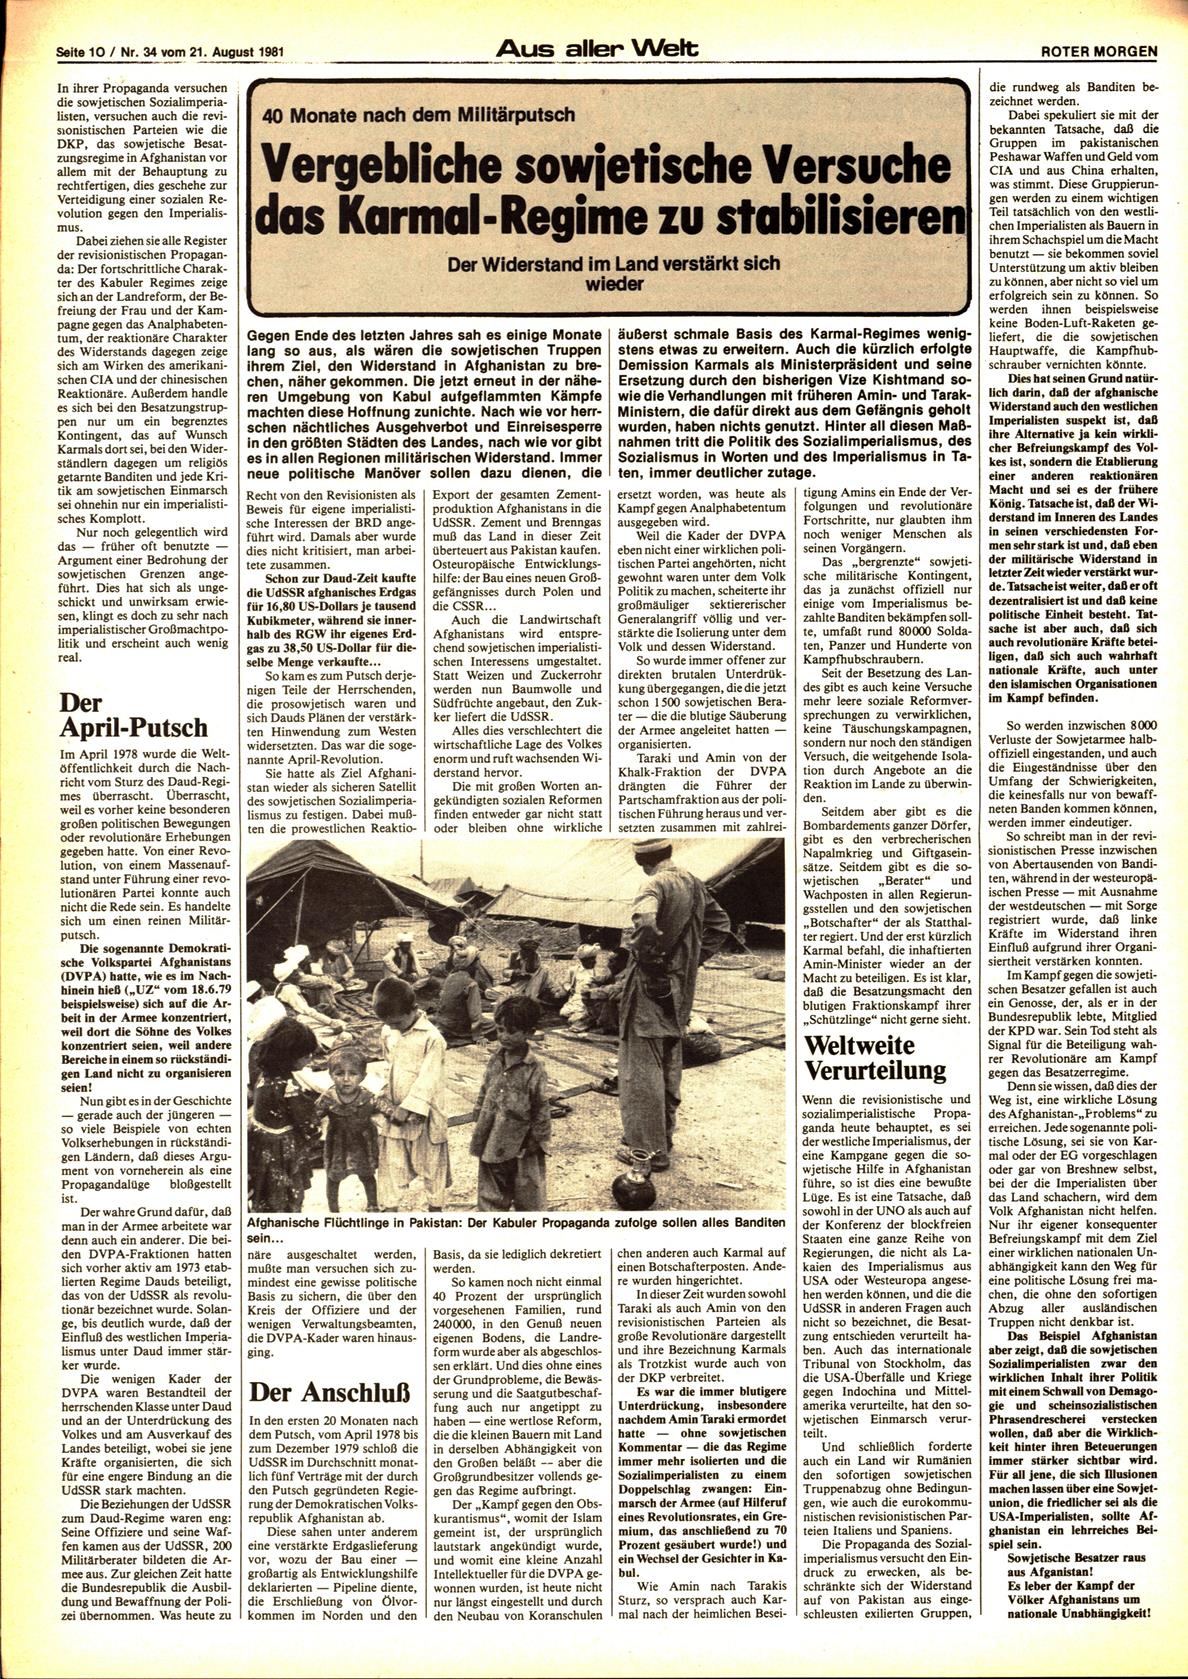 Roter Morgen, 15. Jg., 21. August 1981, Nr. 34, Seite 10